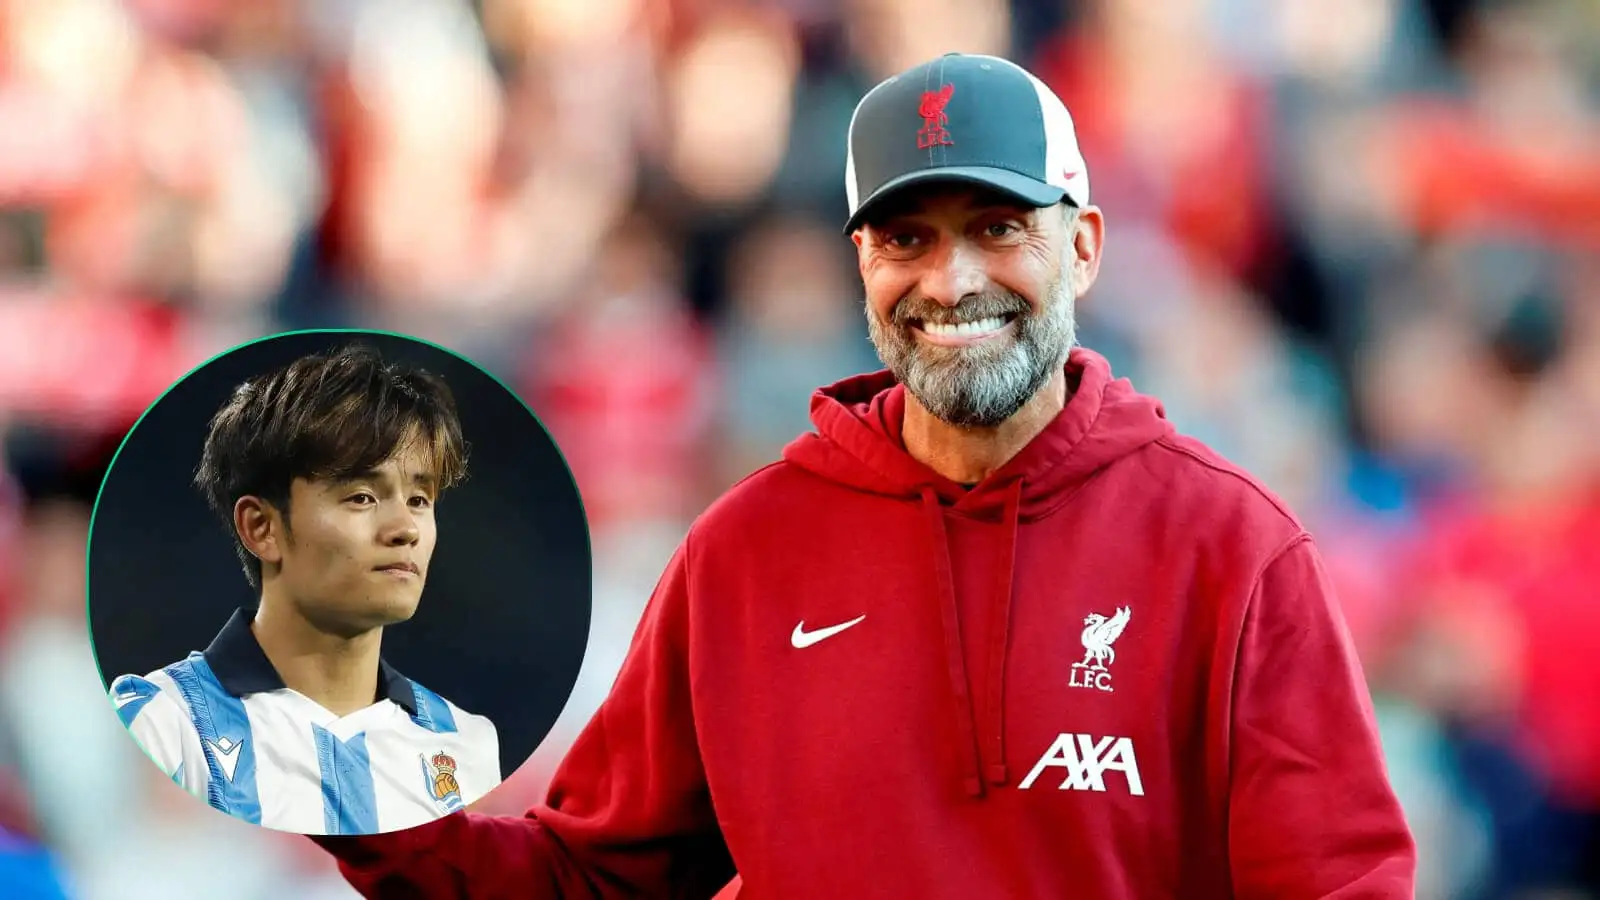 Jurgen Klopp picks LAST-EVER Liverpool signing to replace Salah as major decision looms on new sporting director